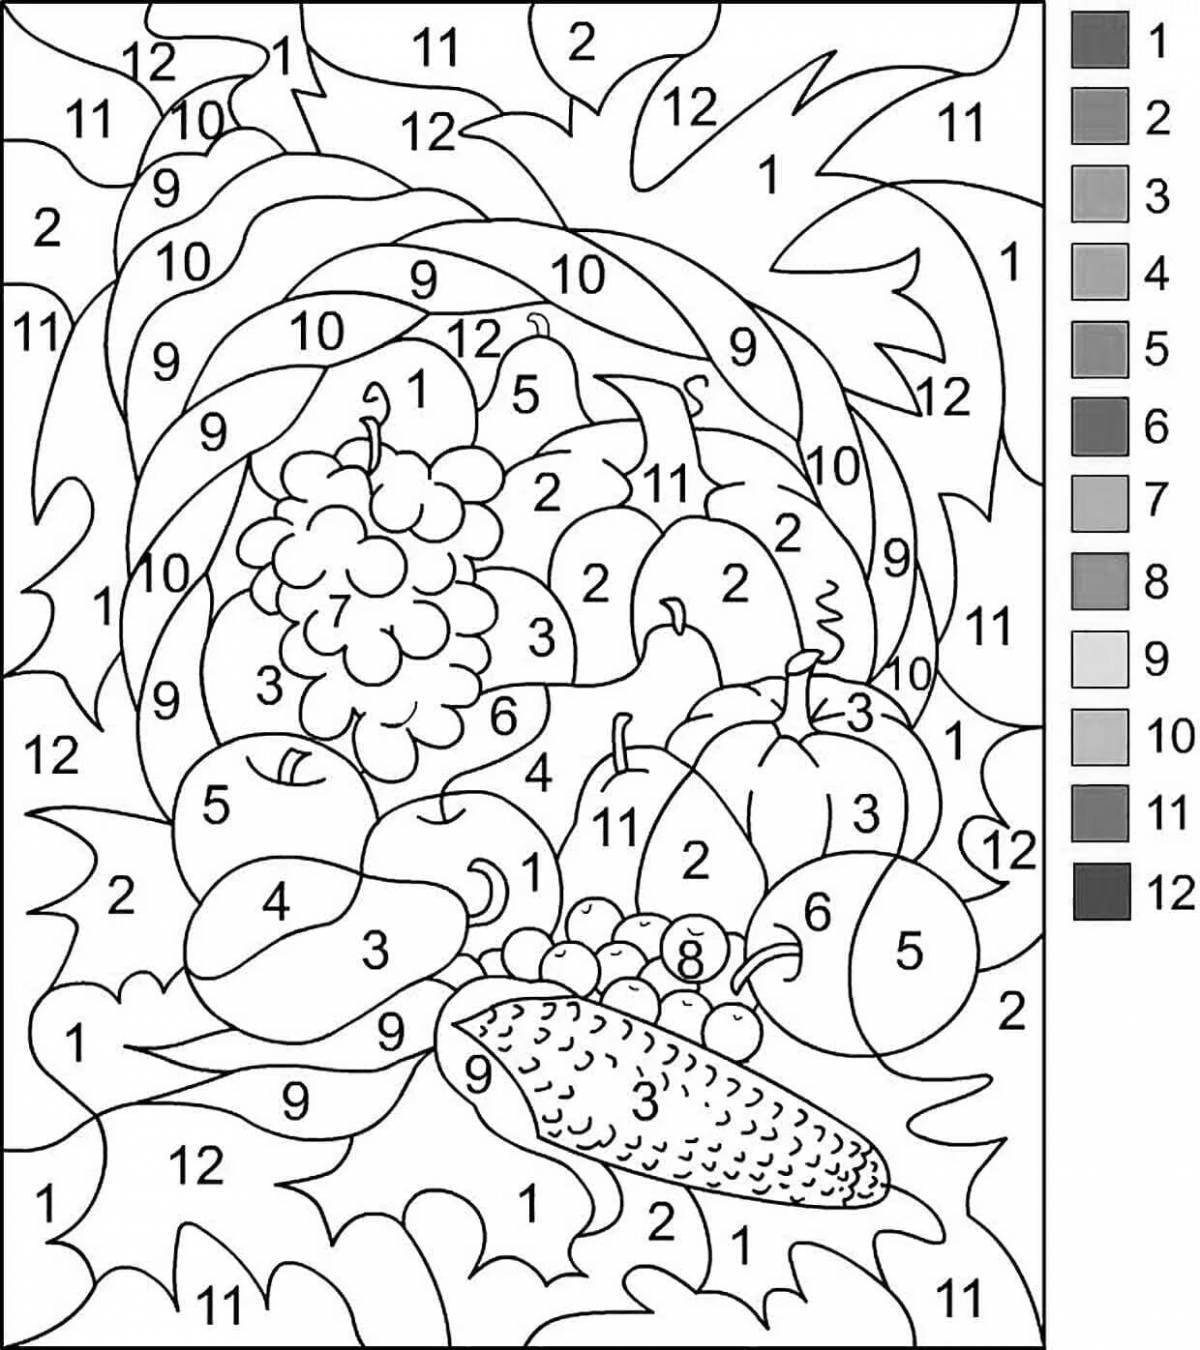 Colourful coloring by numbers for children up to 10 years old